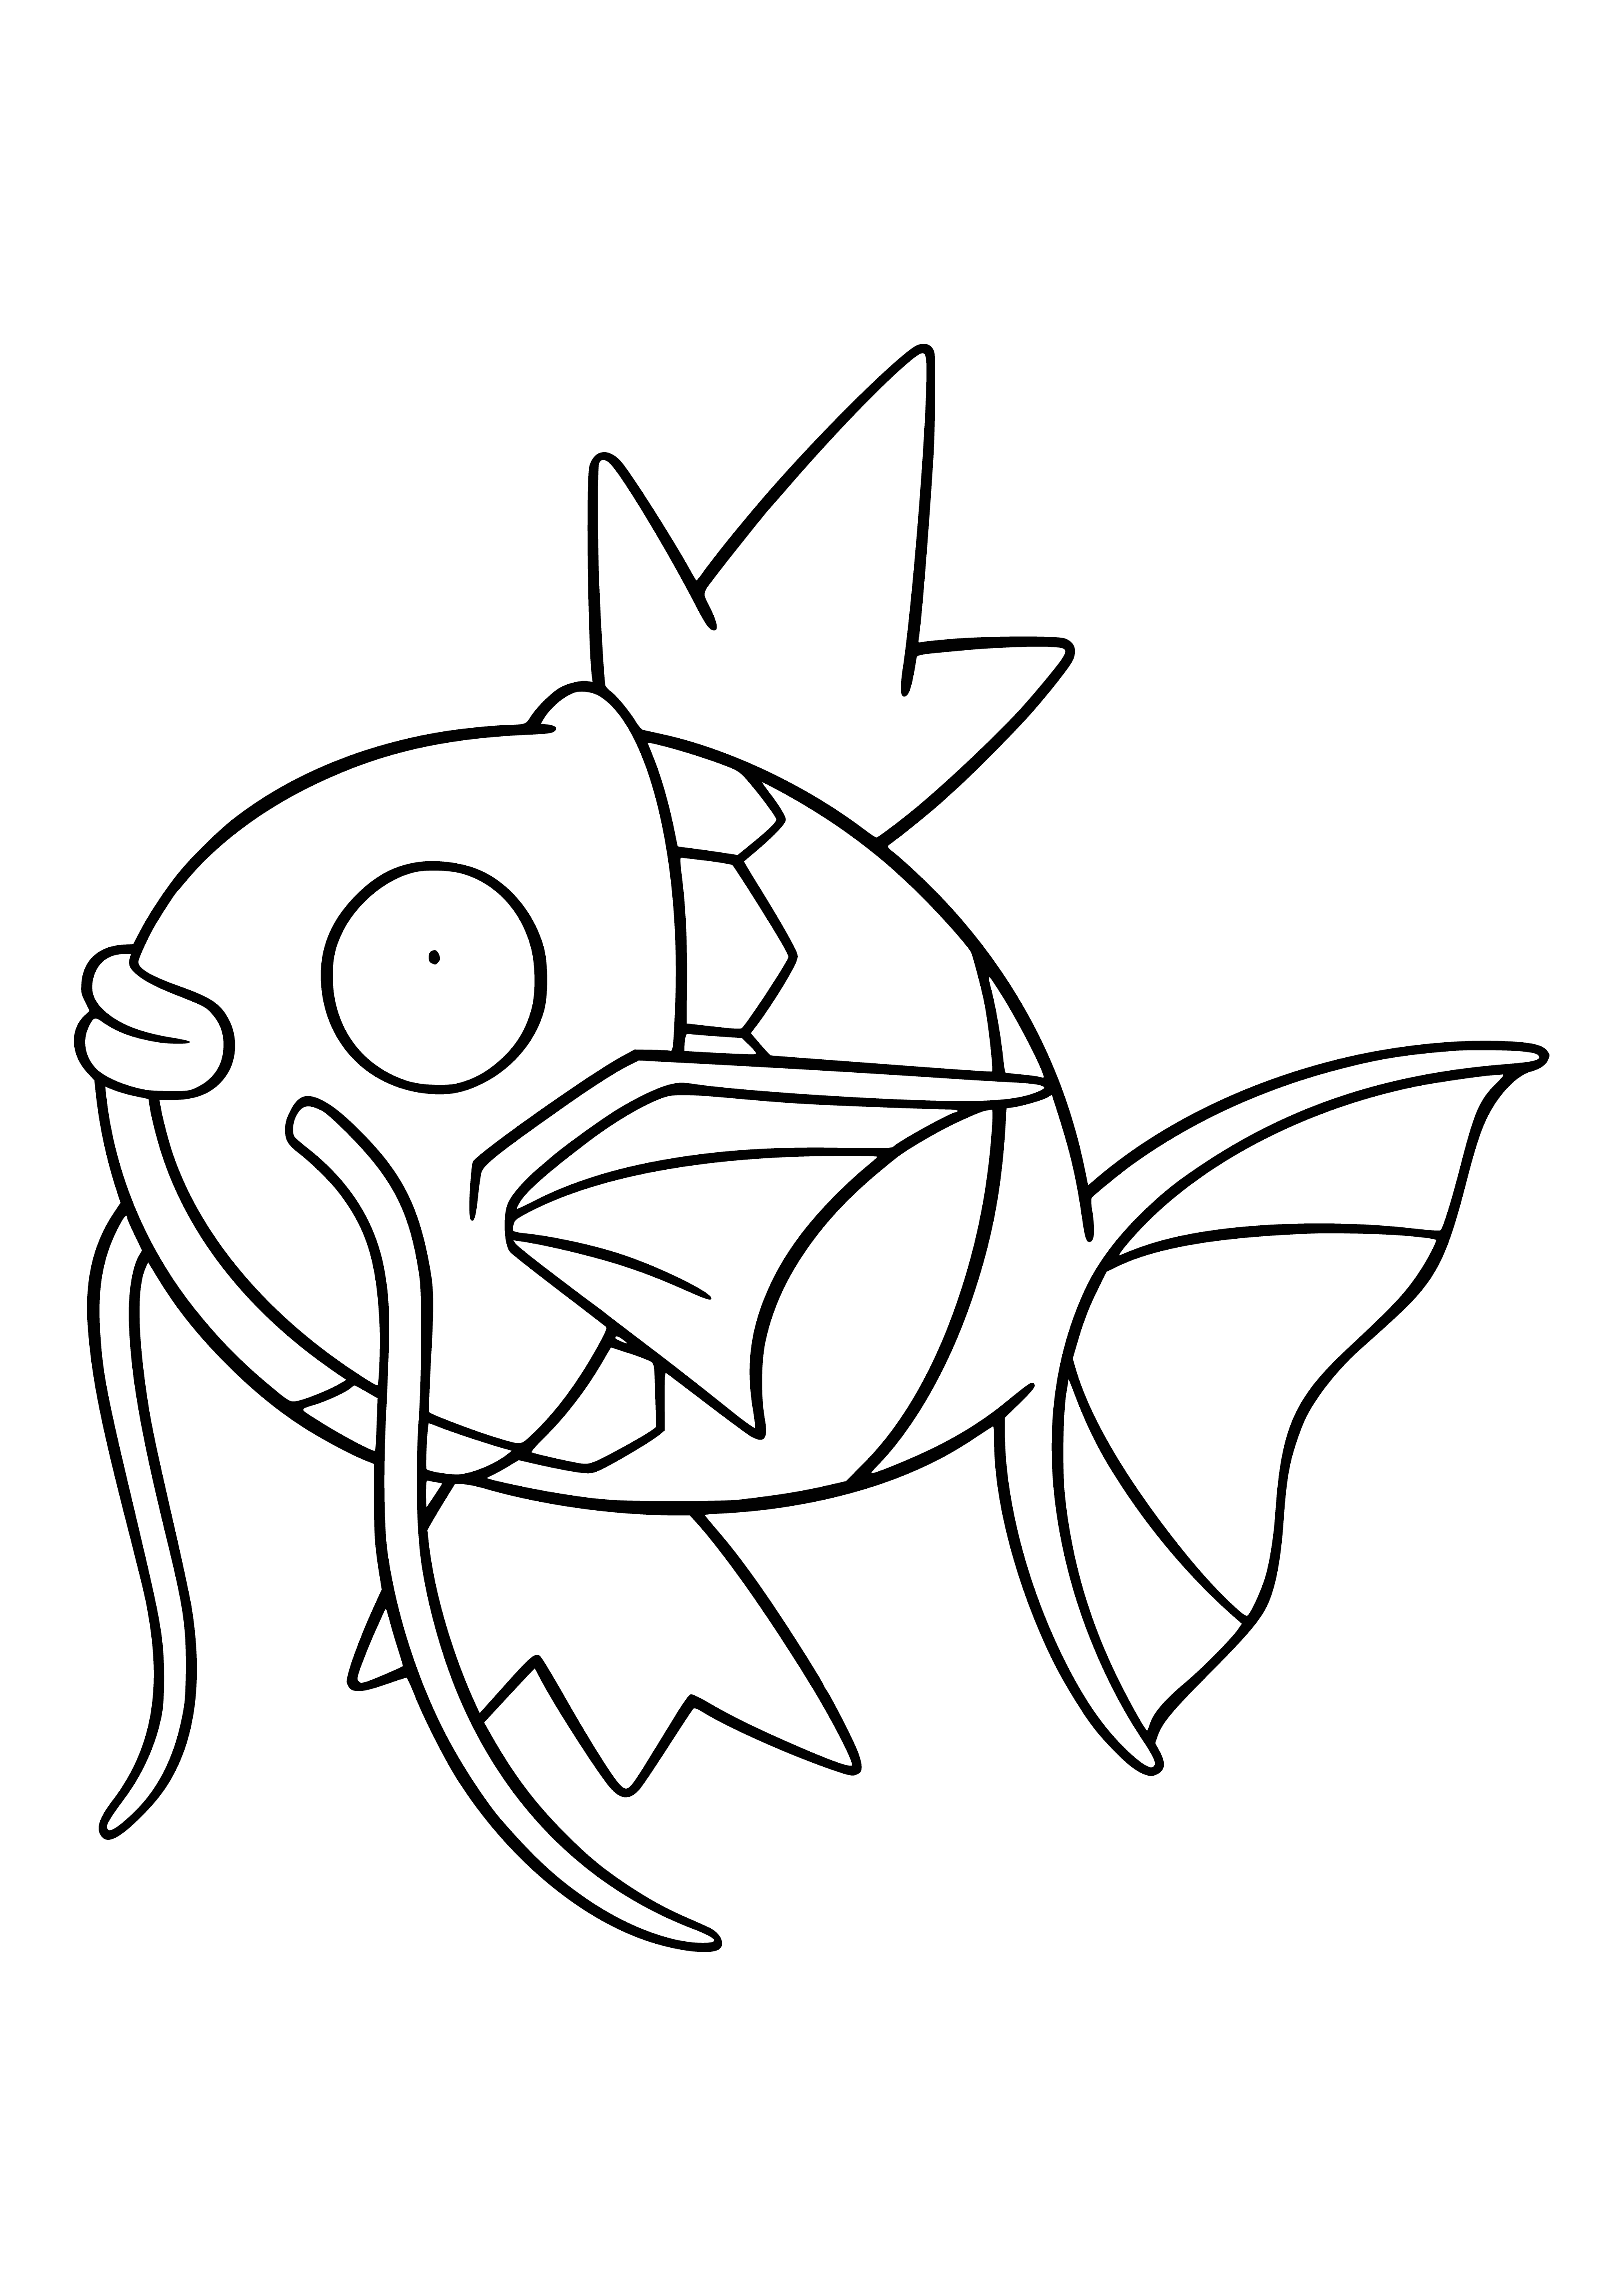 coloring page: Small, orange fish with 4 white spots, long tail fin; Magikarp appears weak and helpless - often seen flailing in the water.